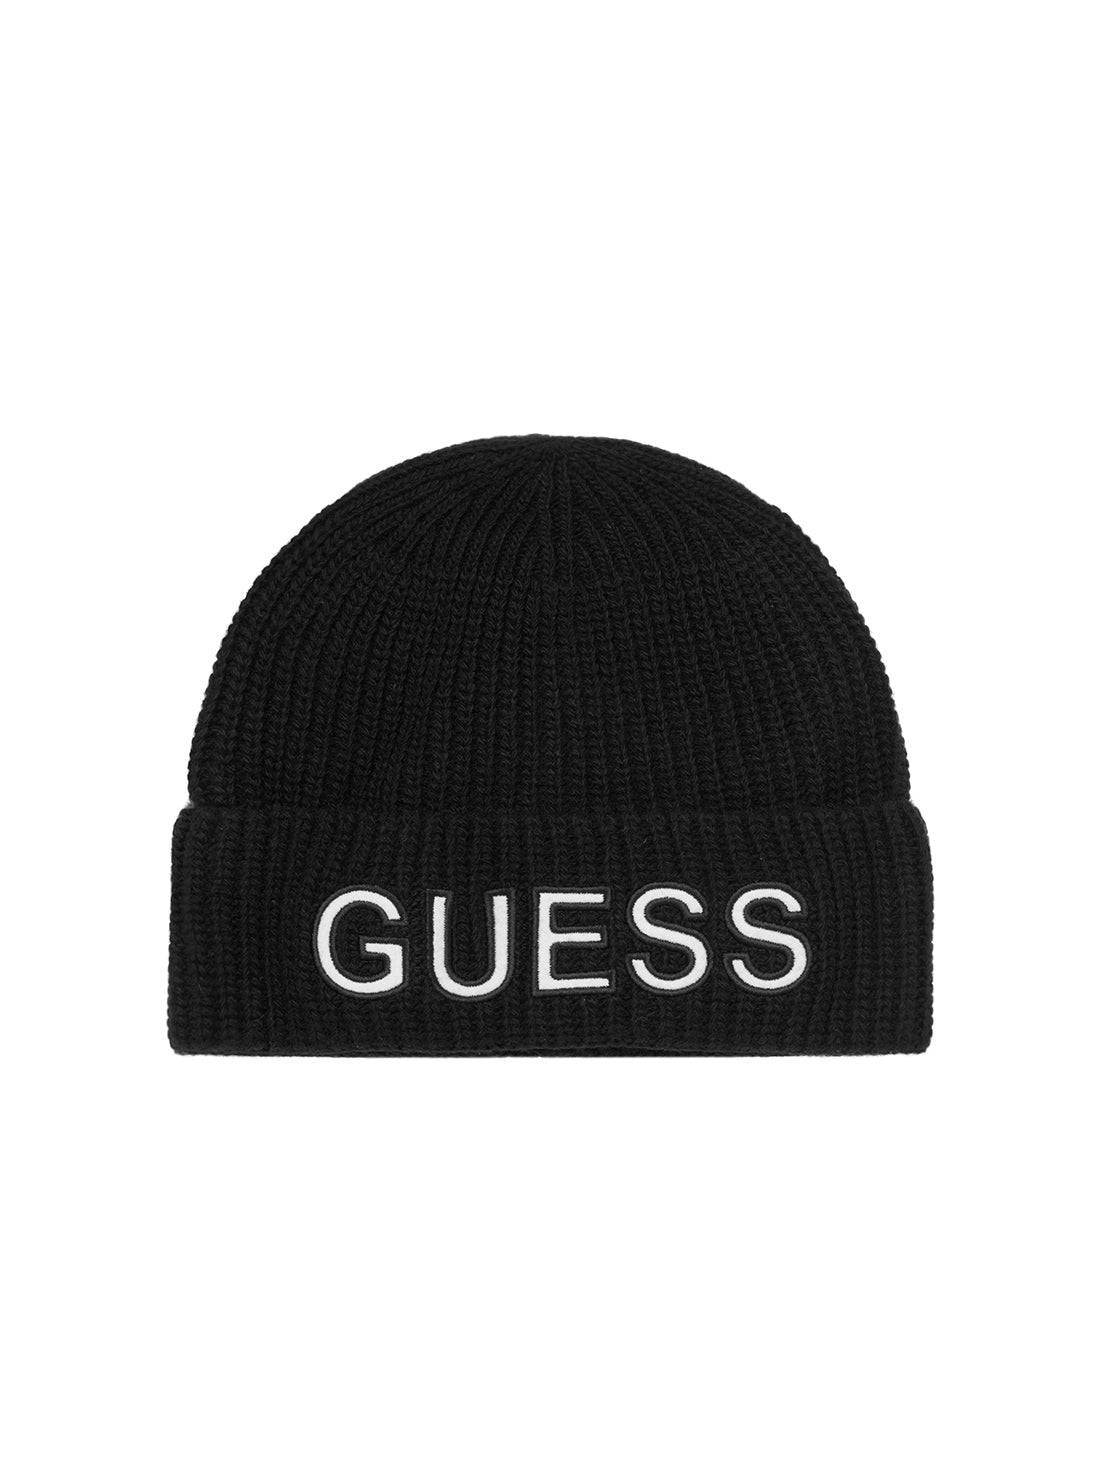 GUESS Black Patch Beanie